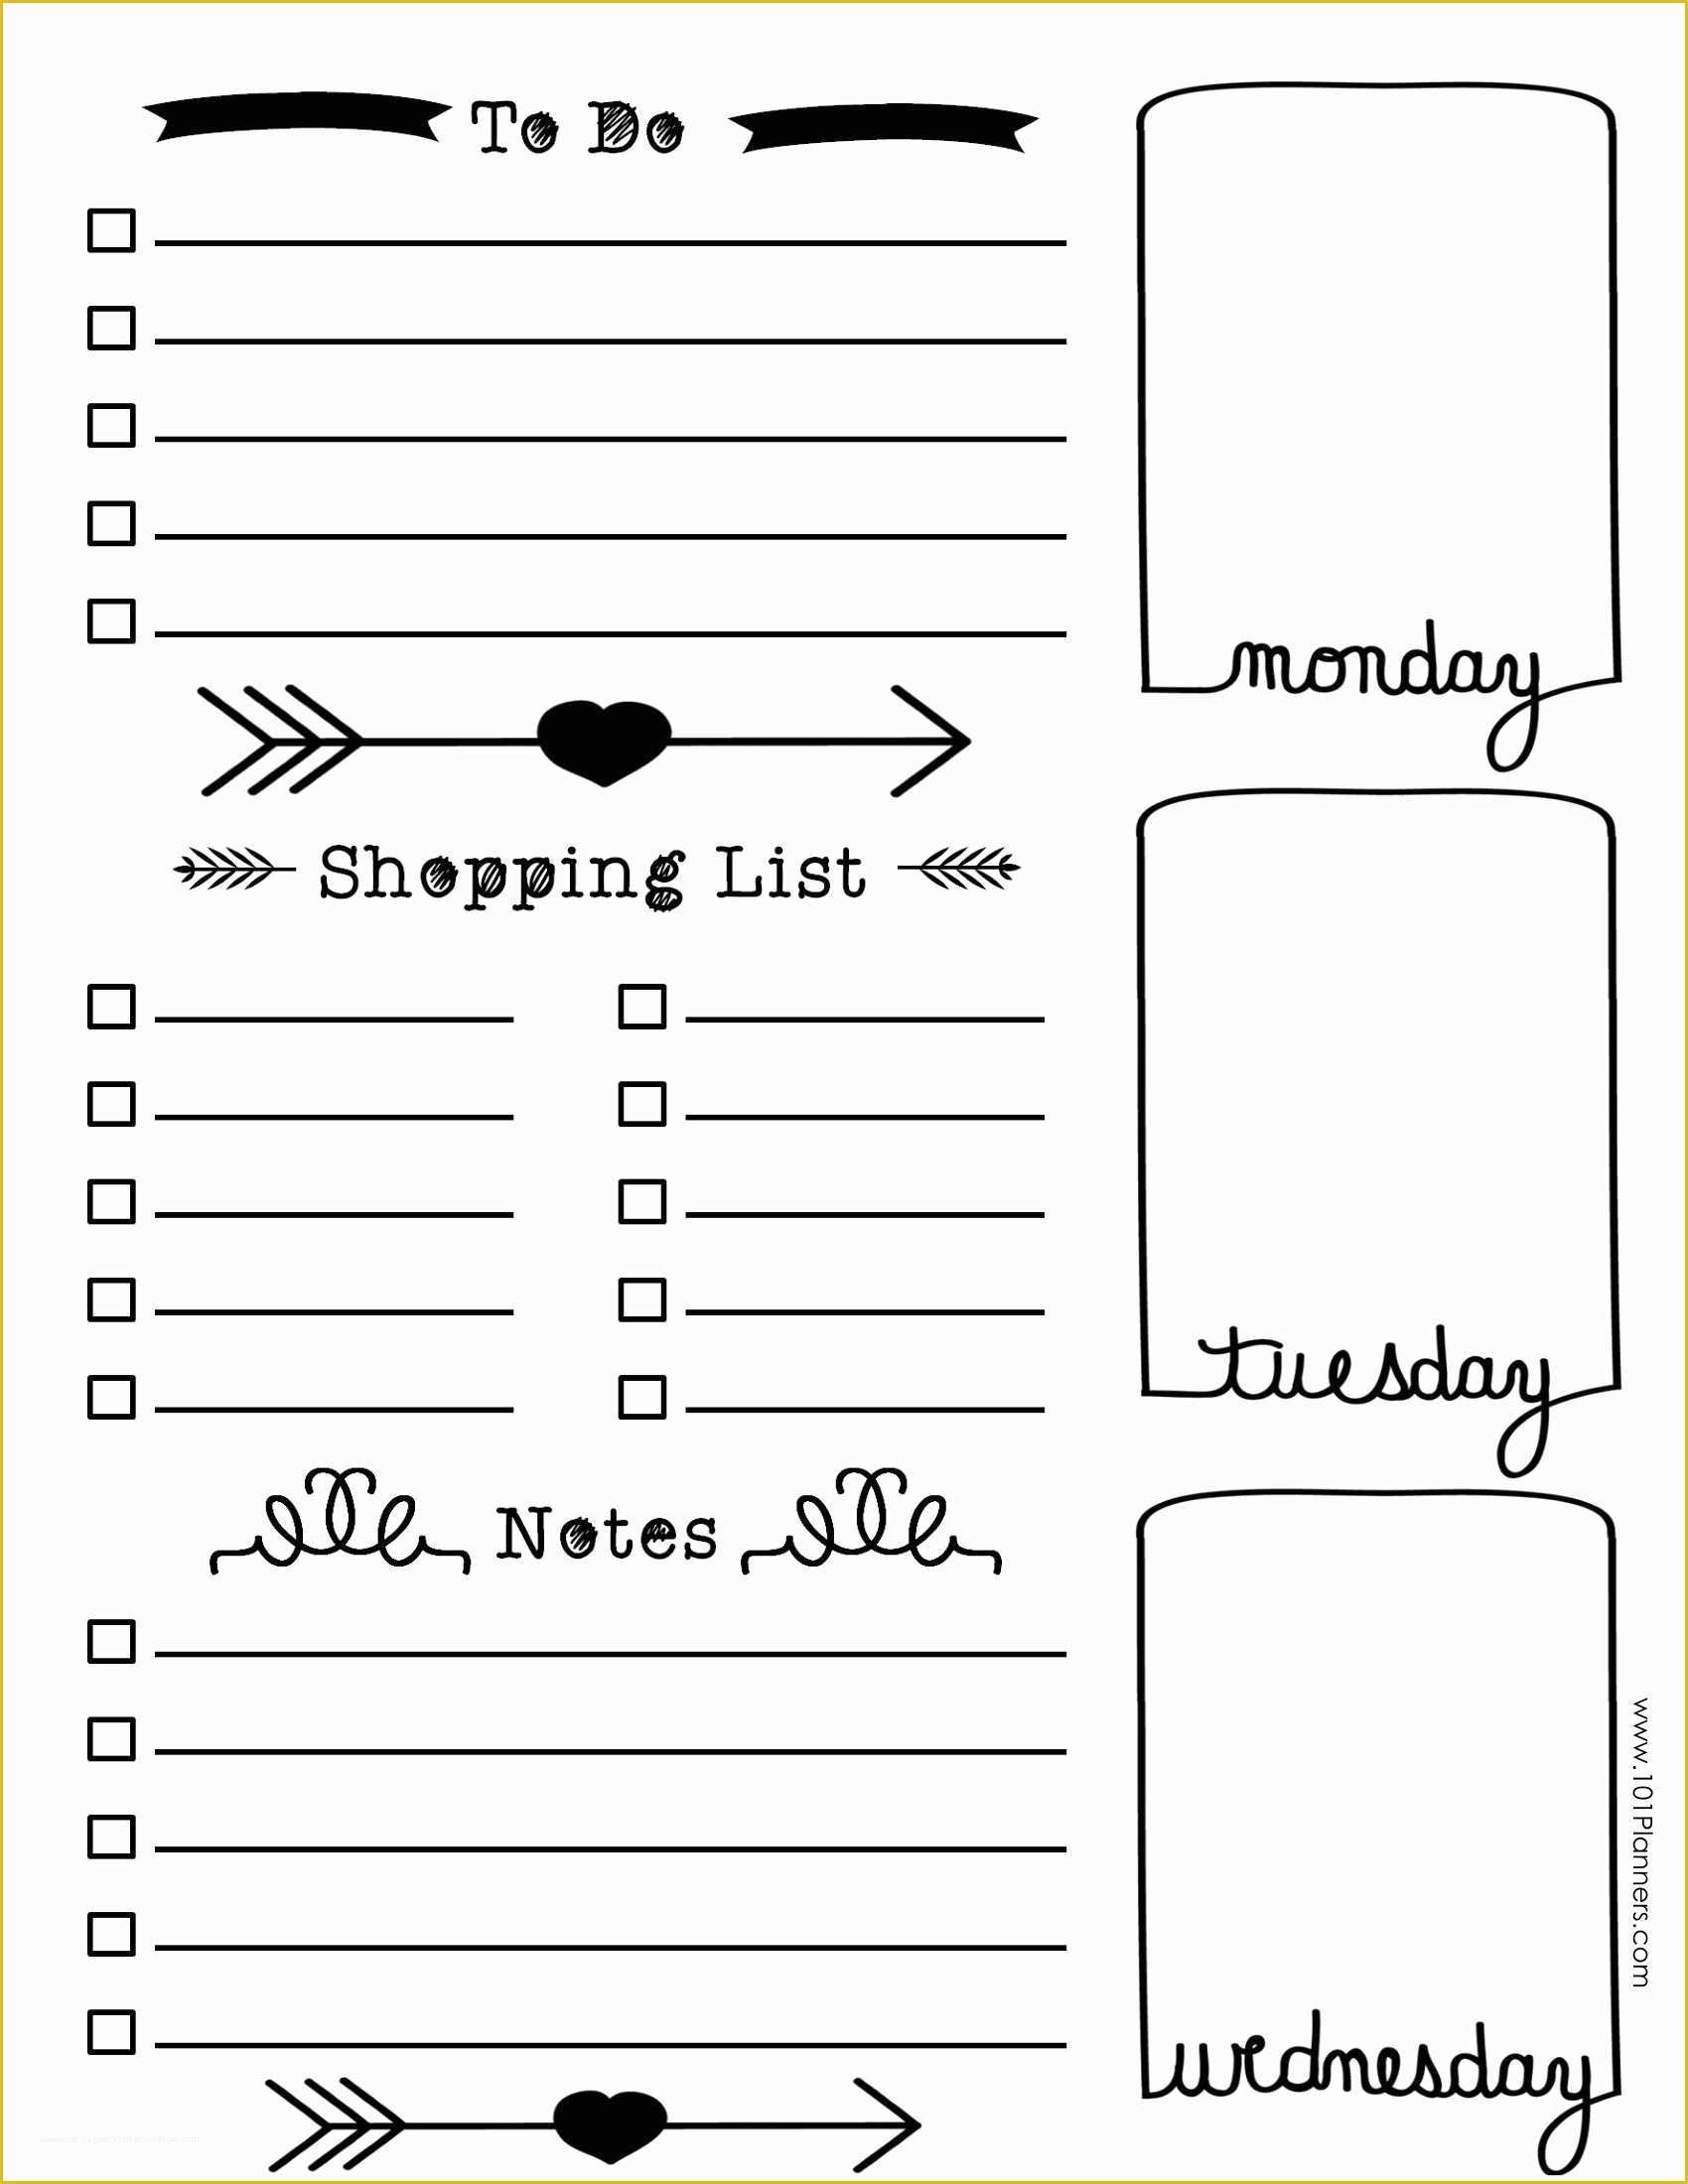 Free Bullet Journal Templates Of Image Result for Bullet Journal Templates